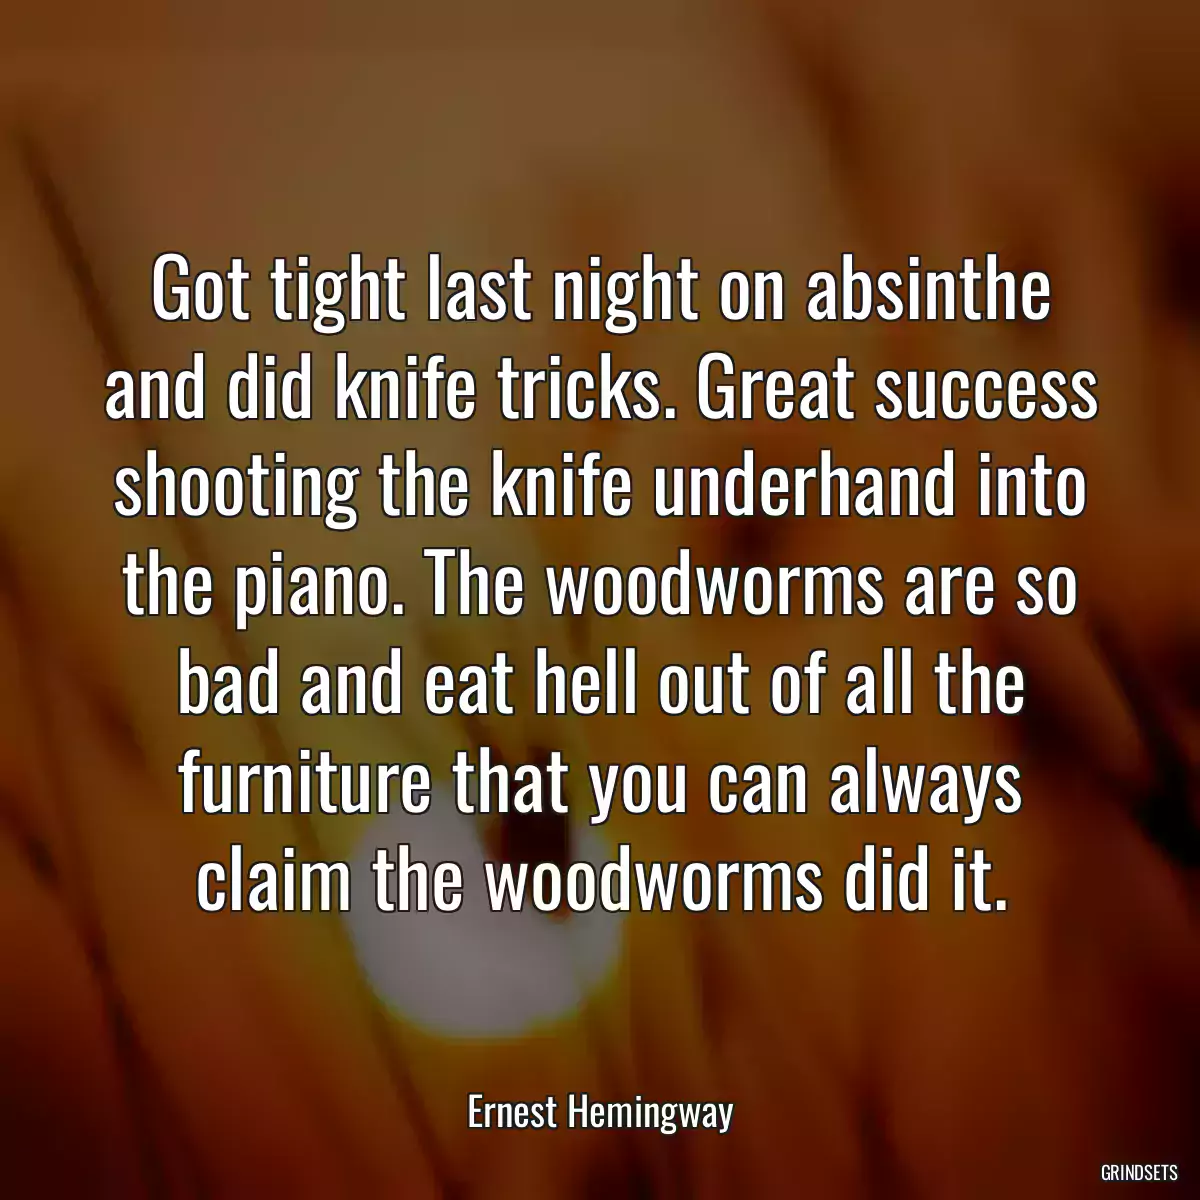 Got tight last night on absinthe and did knife tricks. Great success shooting the knife underhand into the piano. The woodworms are so bad and eat hell out of all the furniture that you can always claim the woodworms did it.